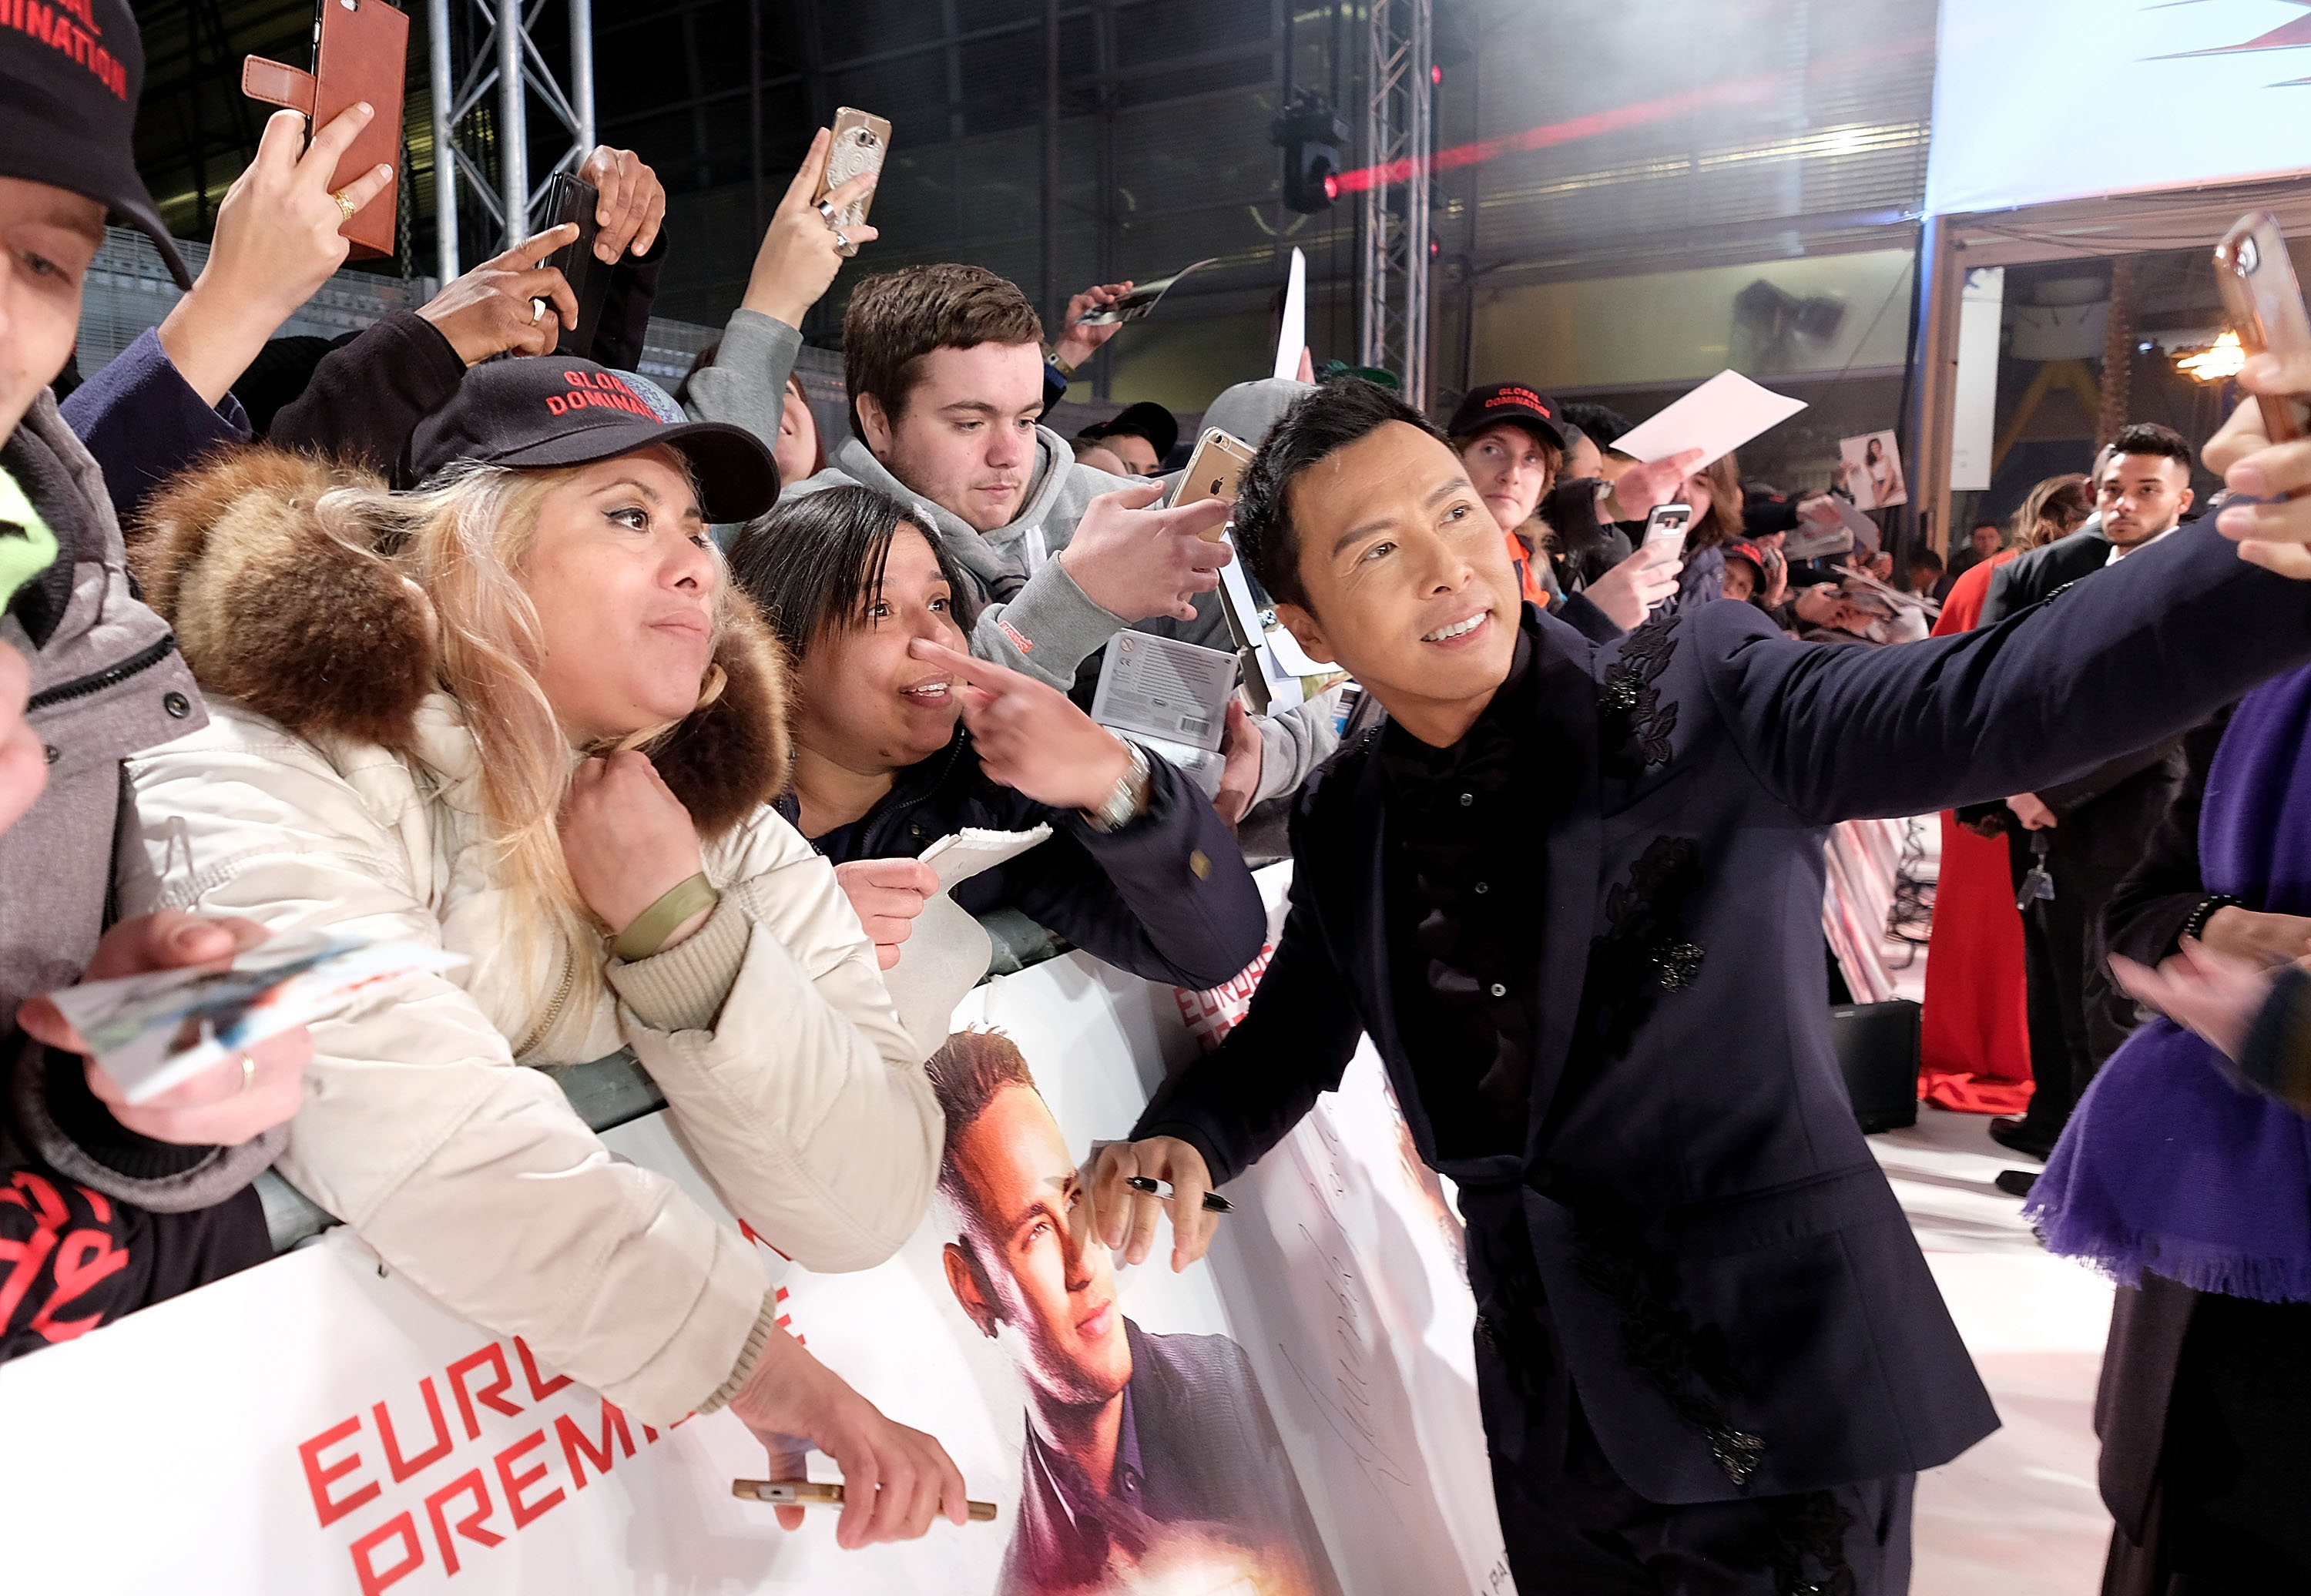 LONDON, ENGLAND - JANUARY 10: Donnie Yen attends the European Premiere of Paramount Pictures' 